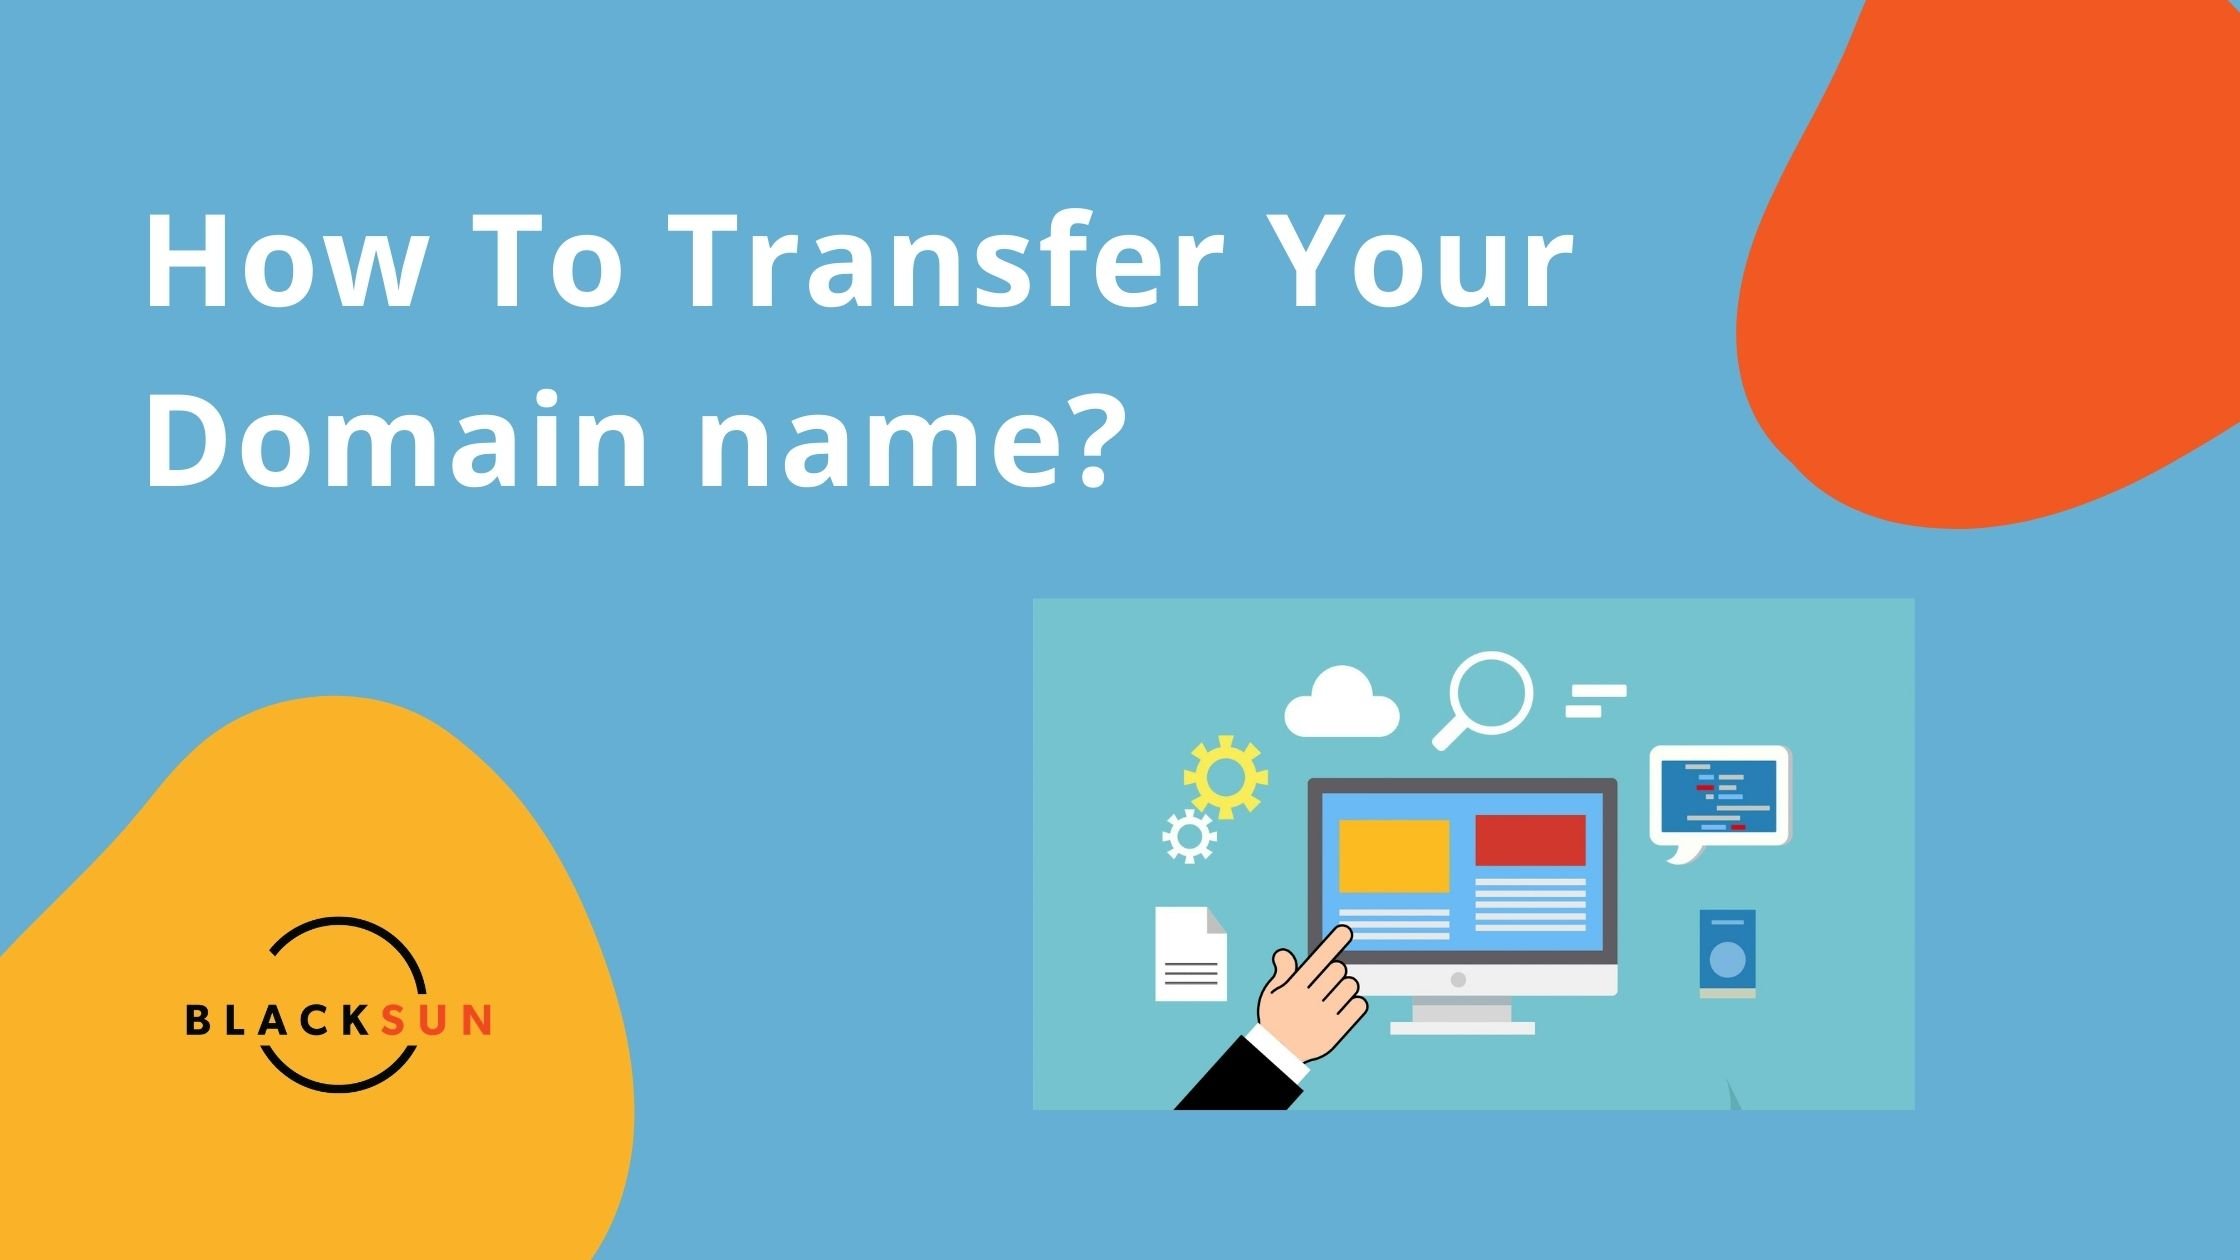 How To Transfer Your Domain Name?